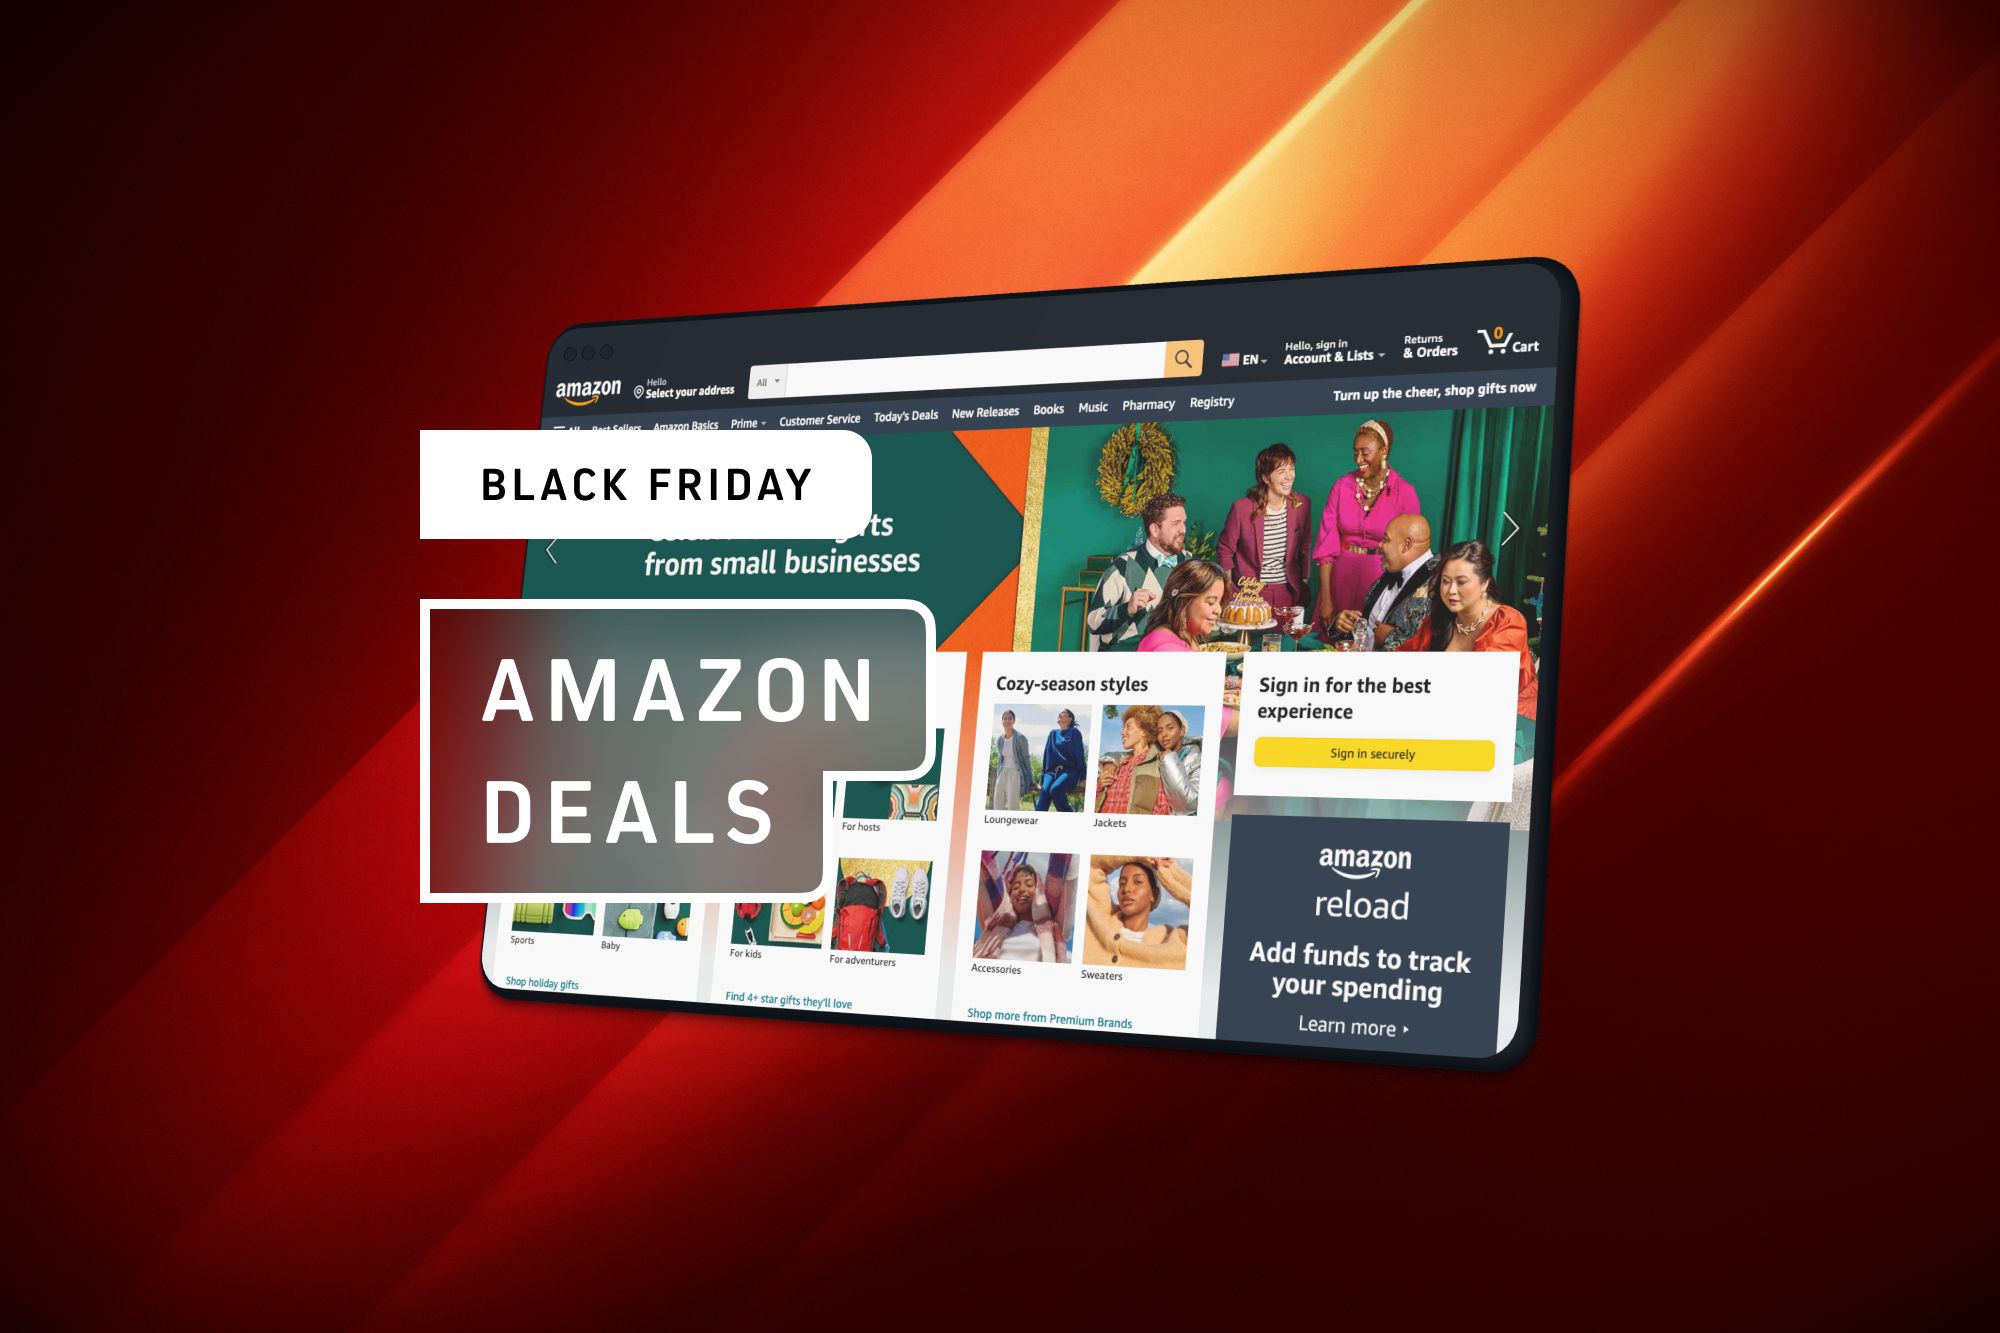 Amazon Black Friday Deals: Save on TVs, Laptops and
More